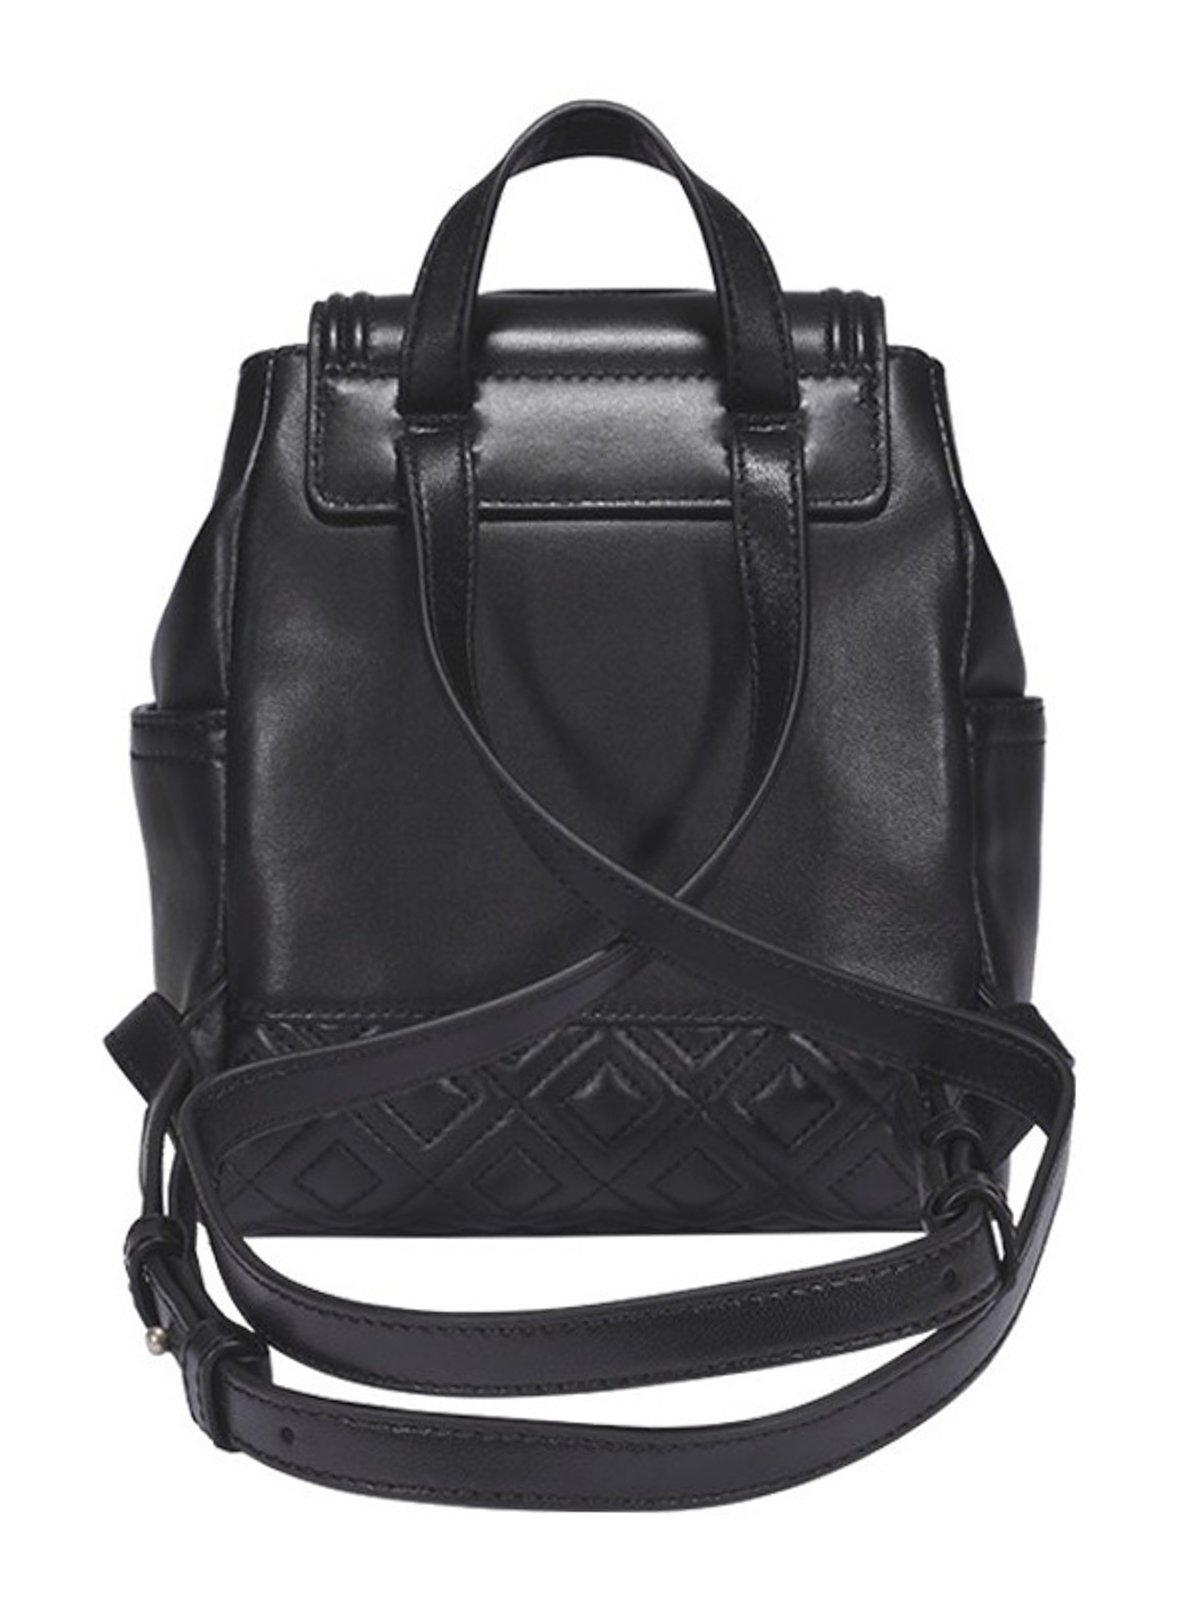 Tory Burch Fleming Leather Backpack- Black 